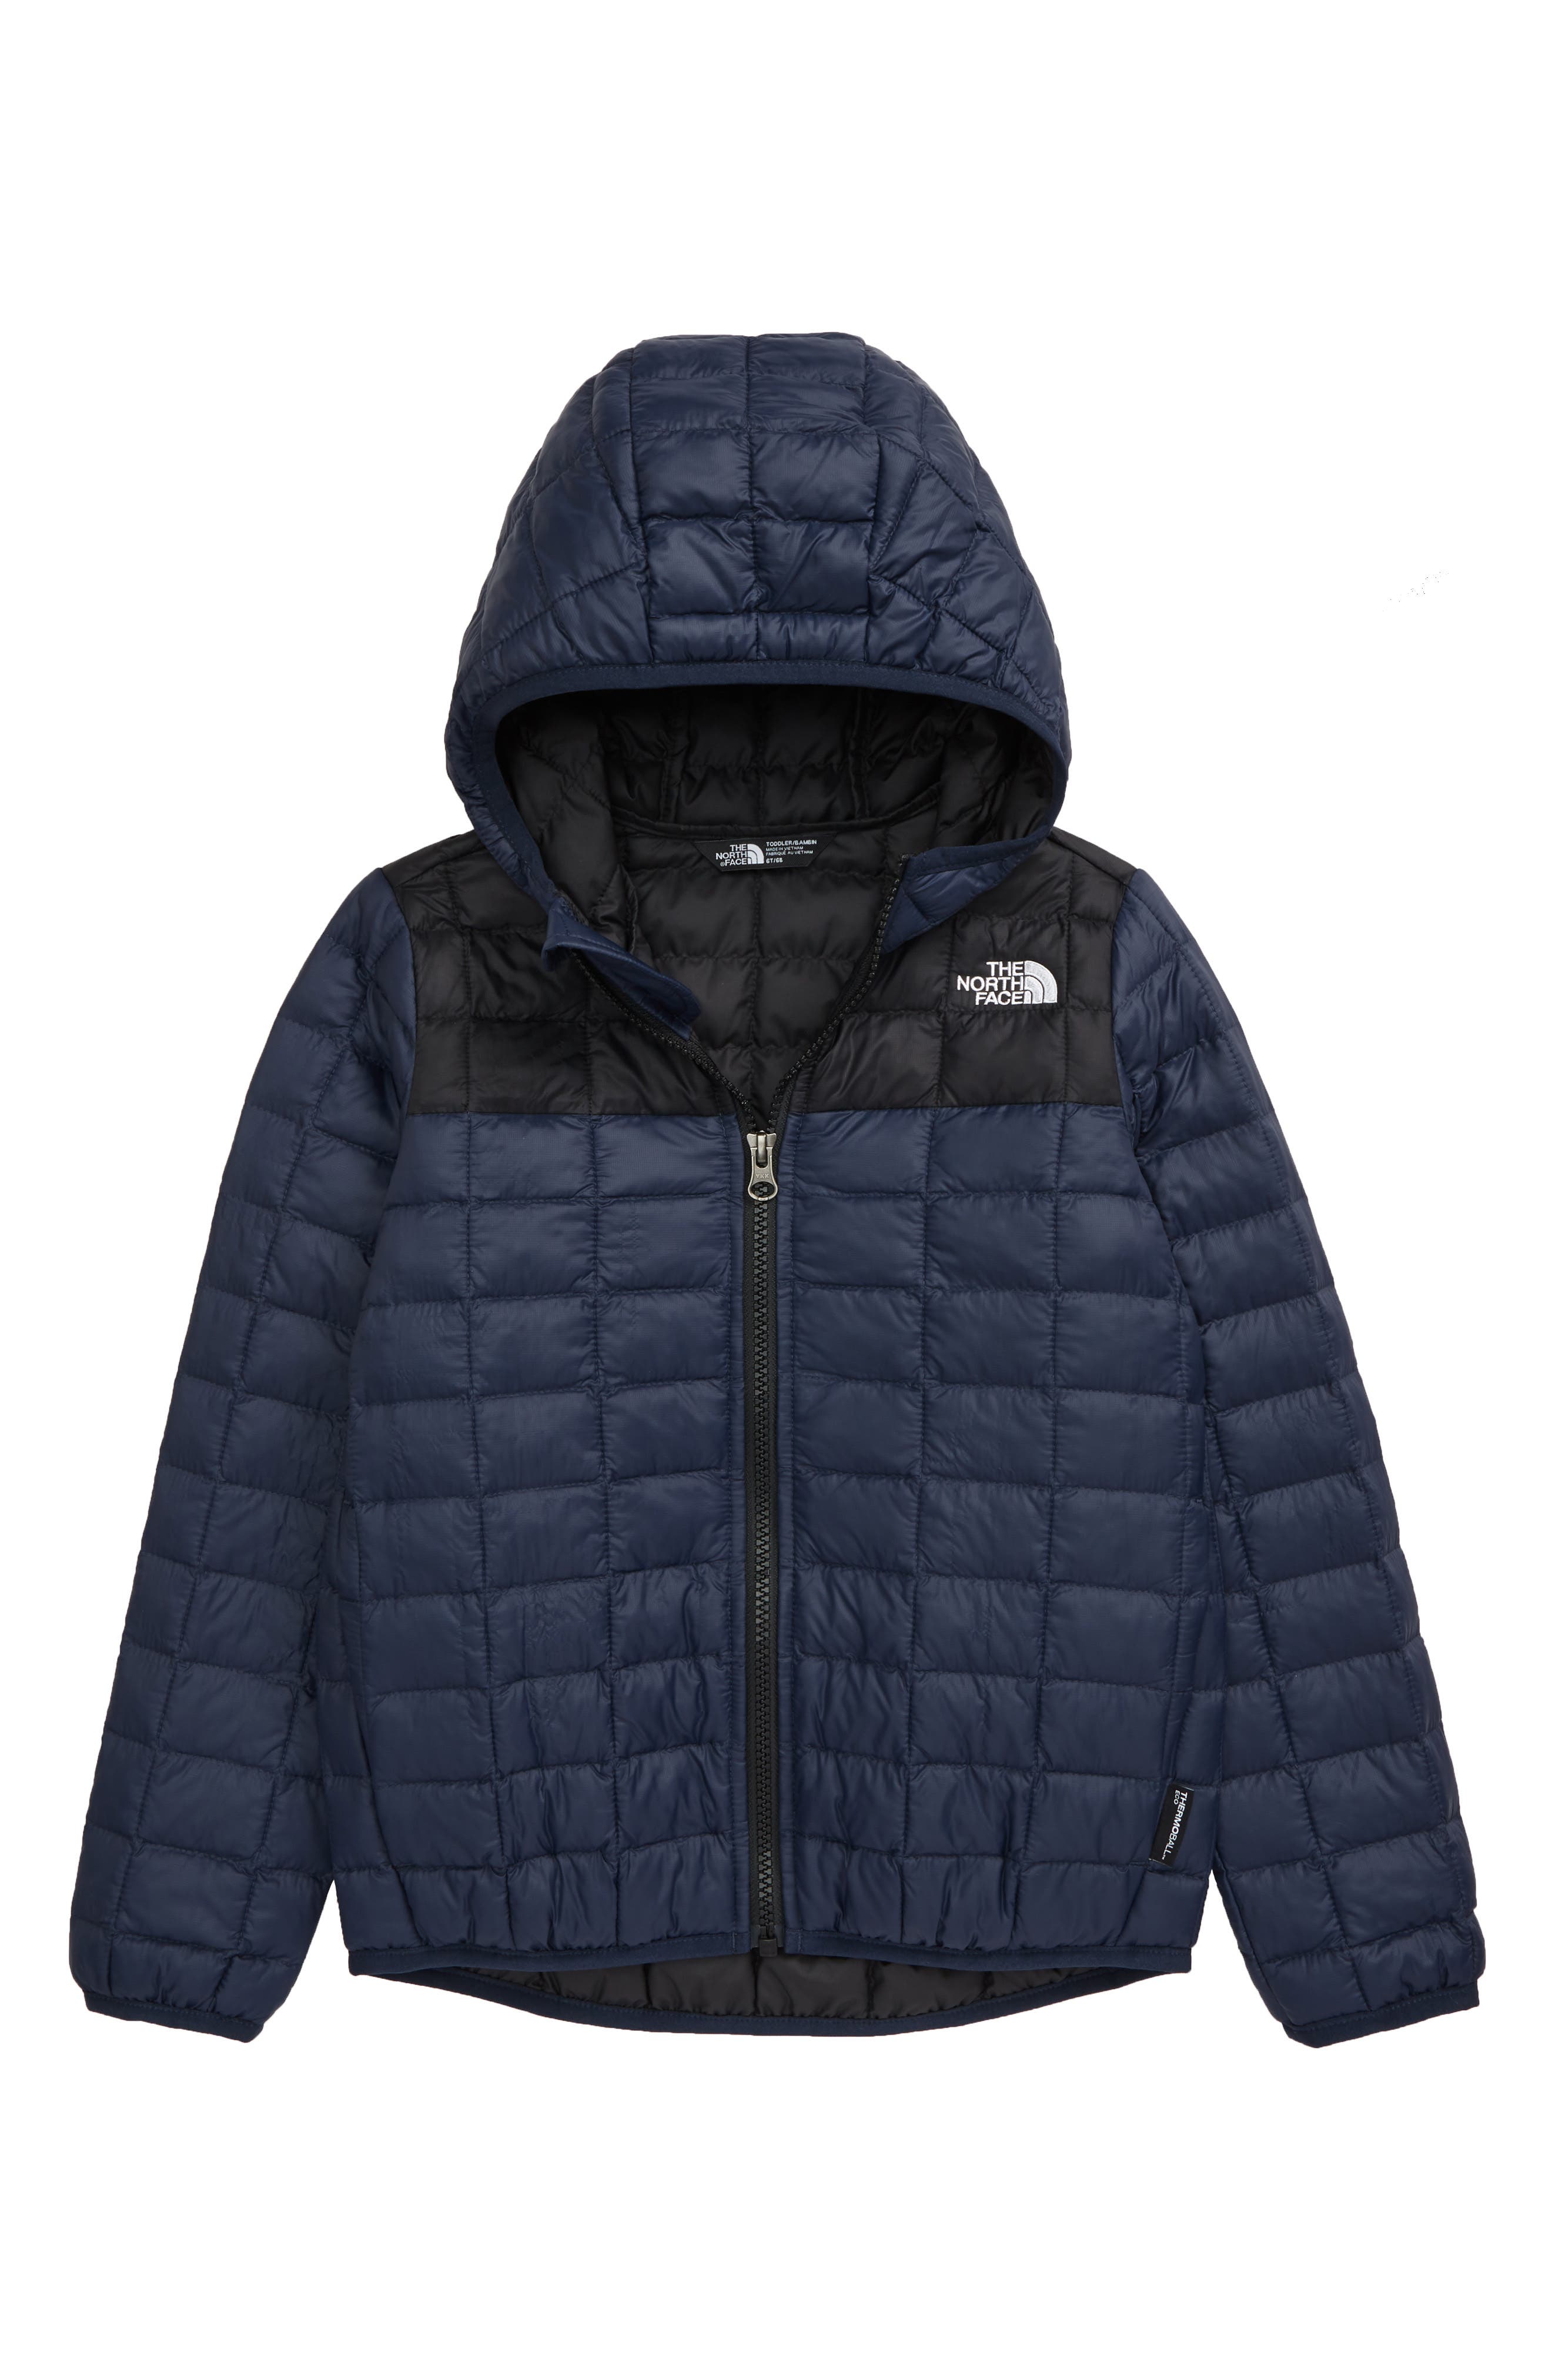 Boys' The North Face Clothes (Sizes 2T 